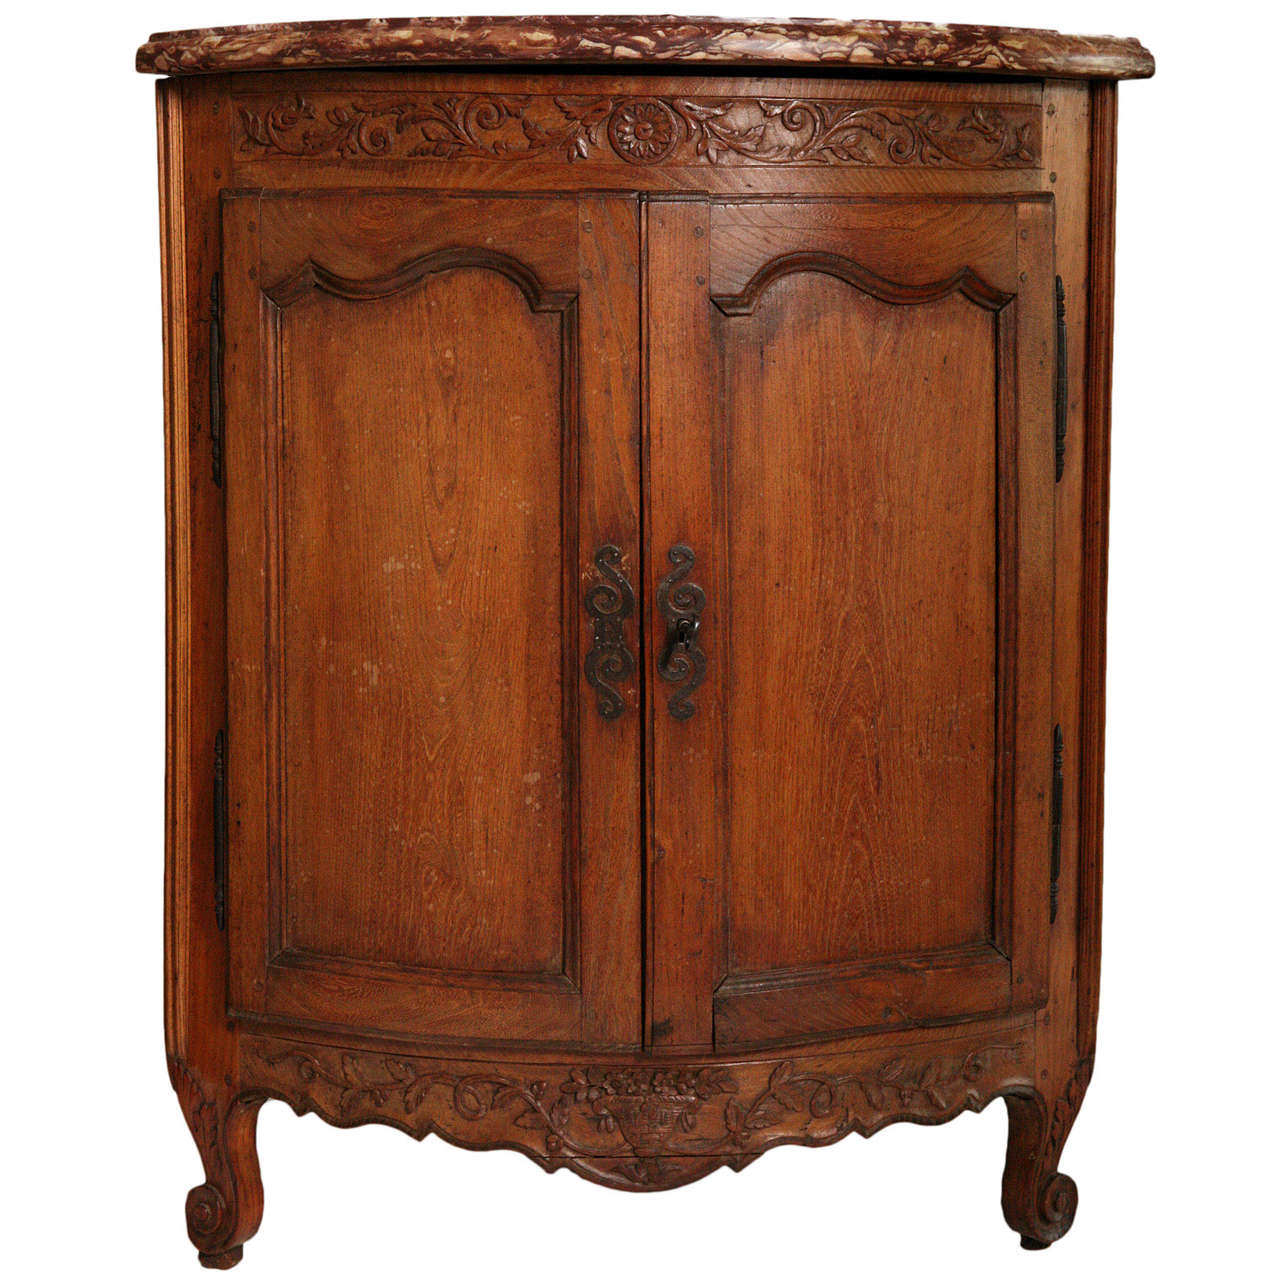 Late 18th Century French Bowfront Corner Cabinet with Marble Top For Sale